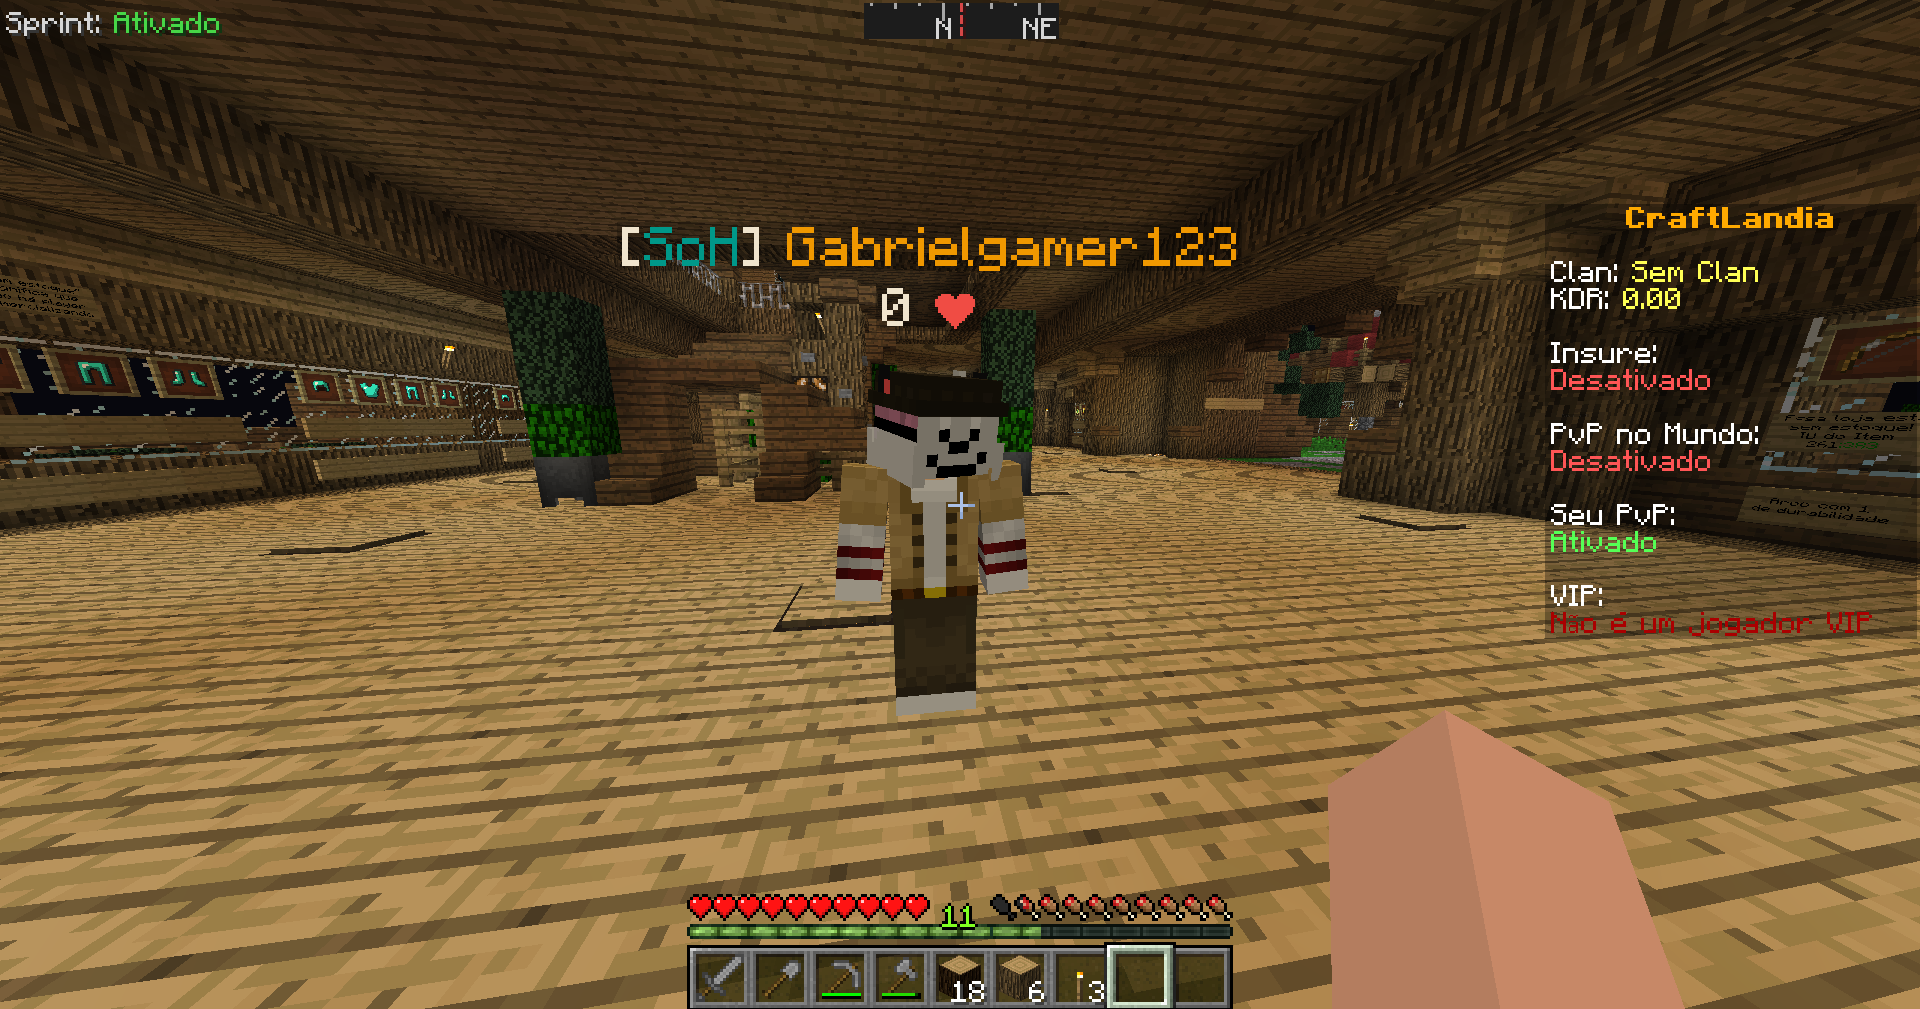 Player with custom skin and cape